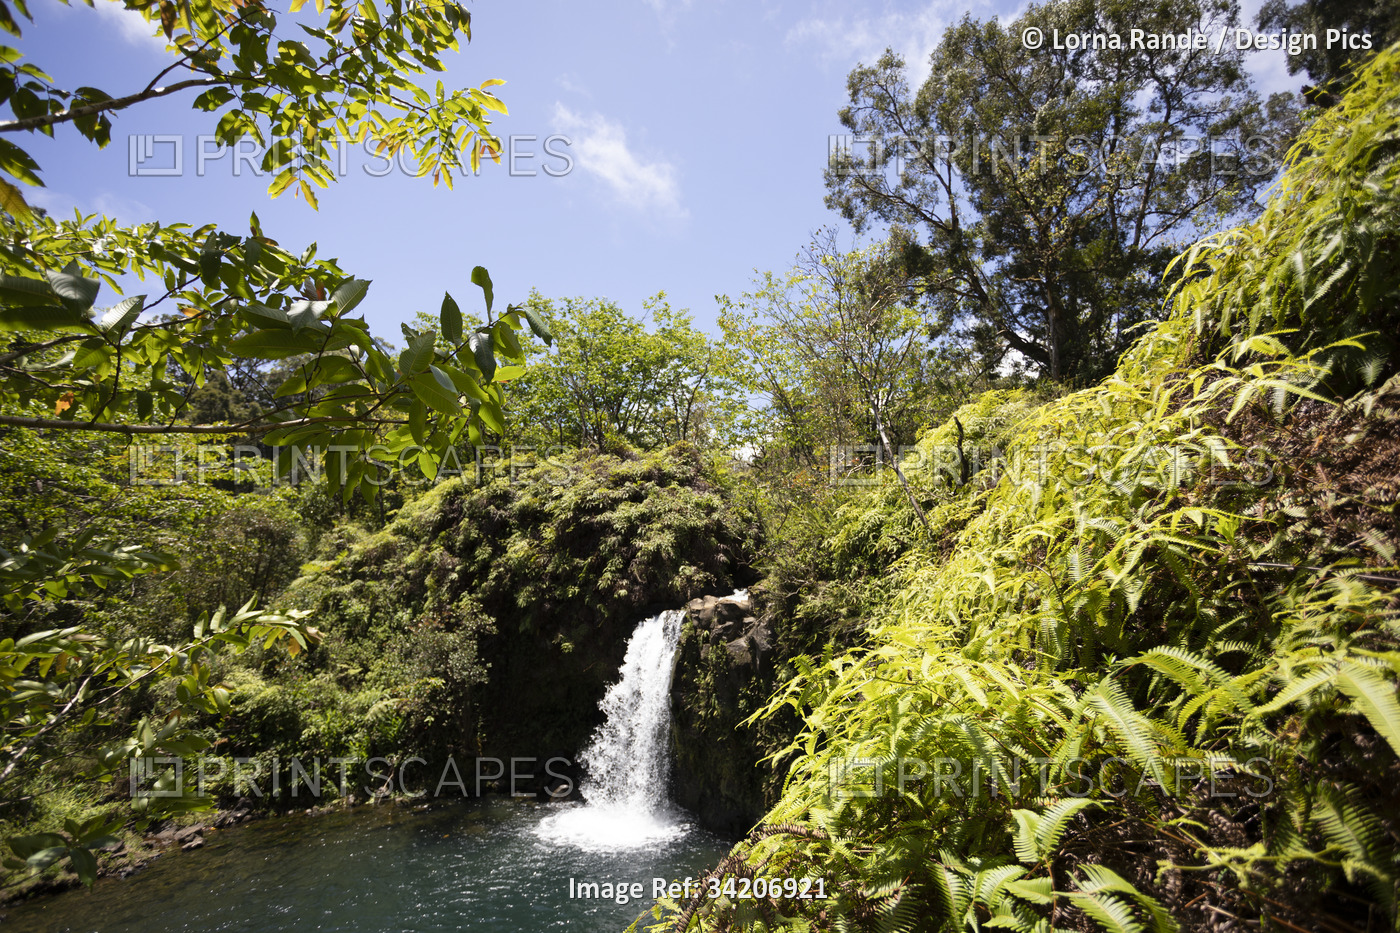 View through lush vegetation of a plunging waterfall with a turquoise pool ...